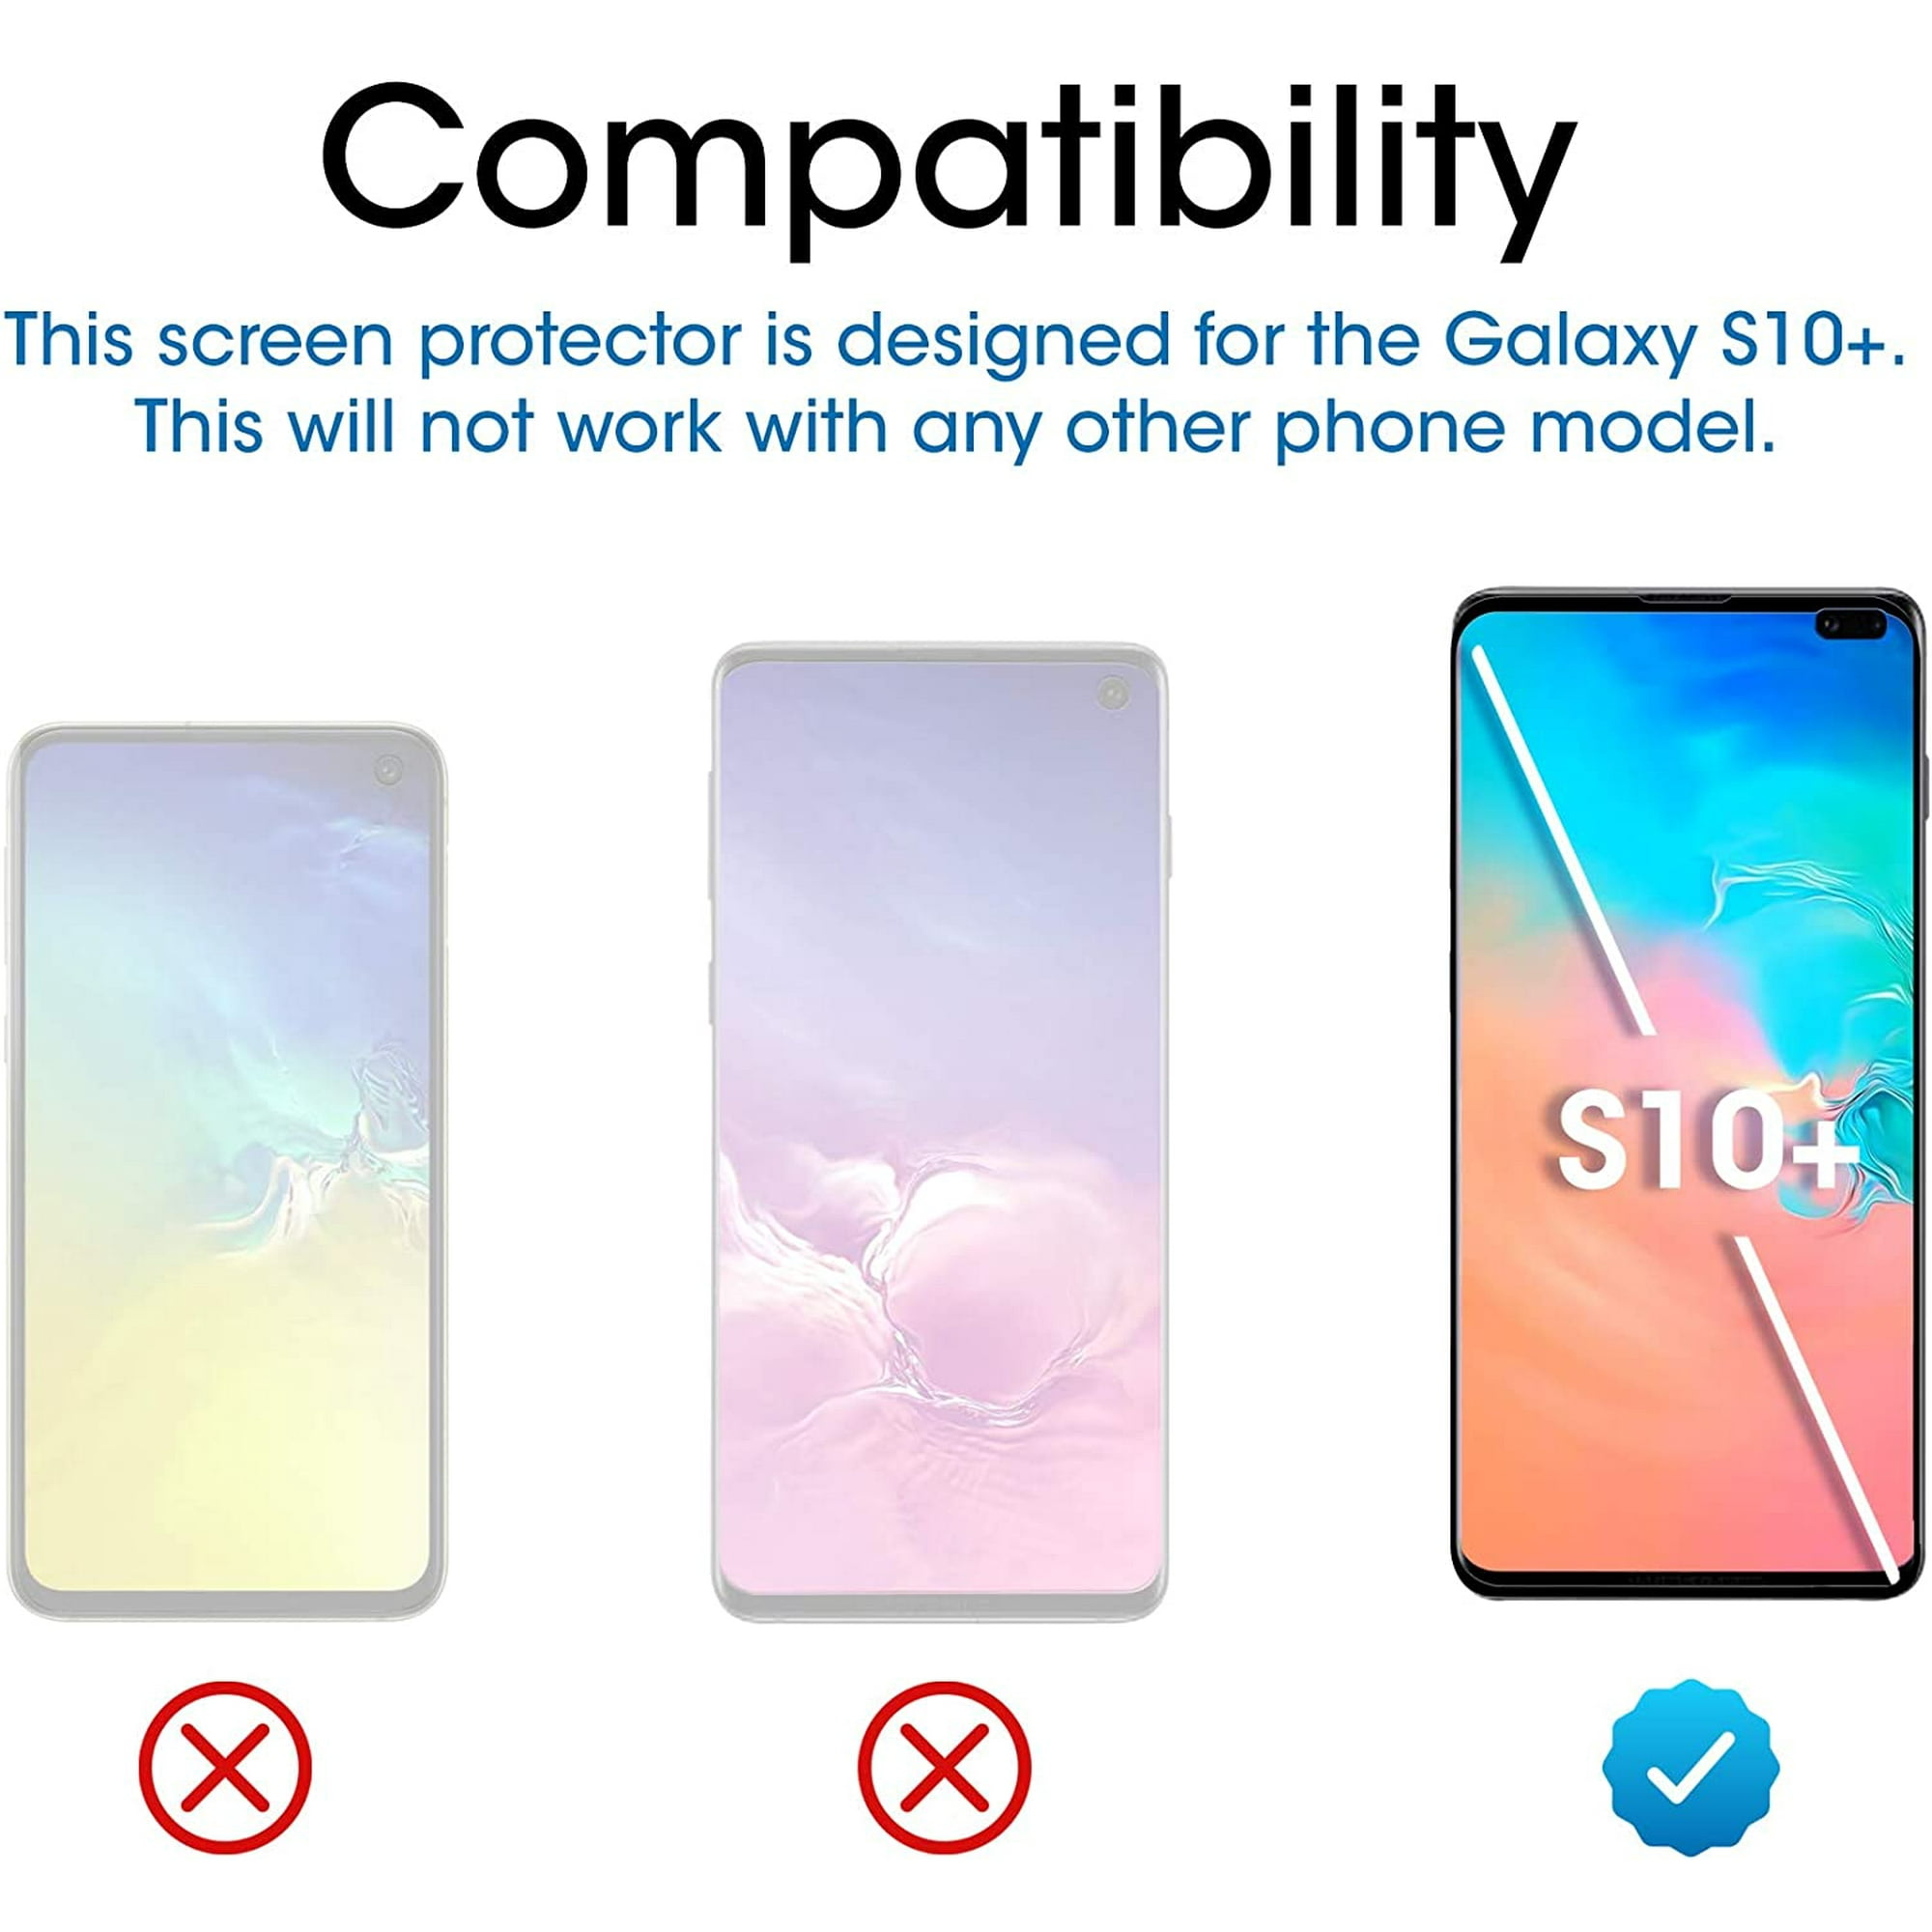 Sparkle Veil Savant Galaxy S10 Plus Screen Protector Glass, amFilm Full Cover (Not Compatible  with Fingerprint Scanner) Tempered Glass | Walmart Canada